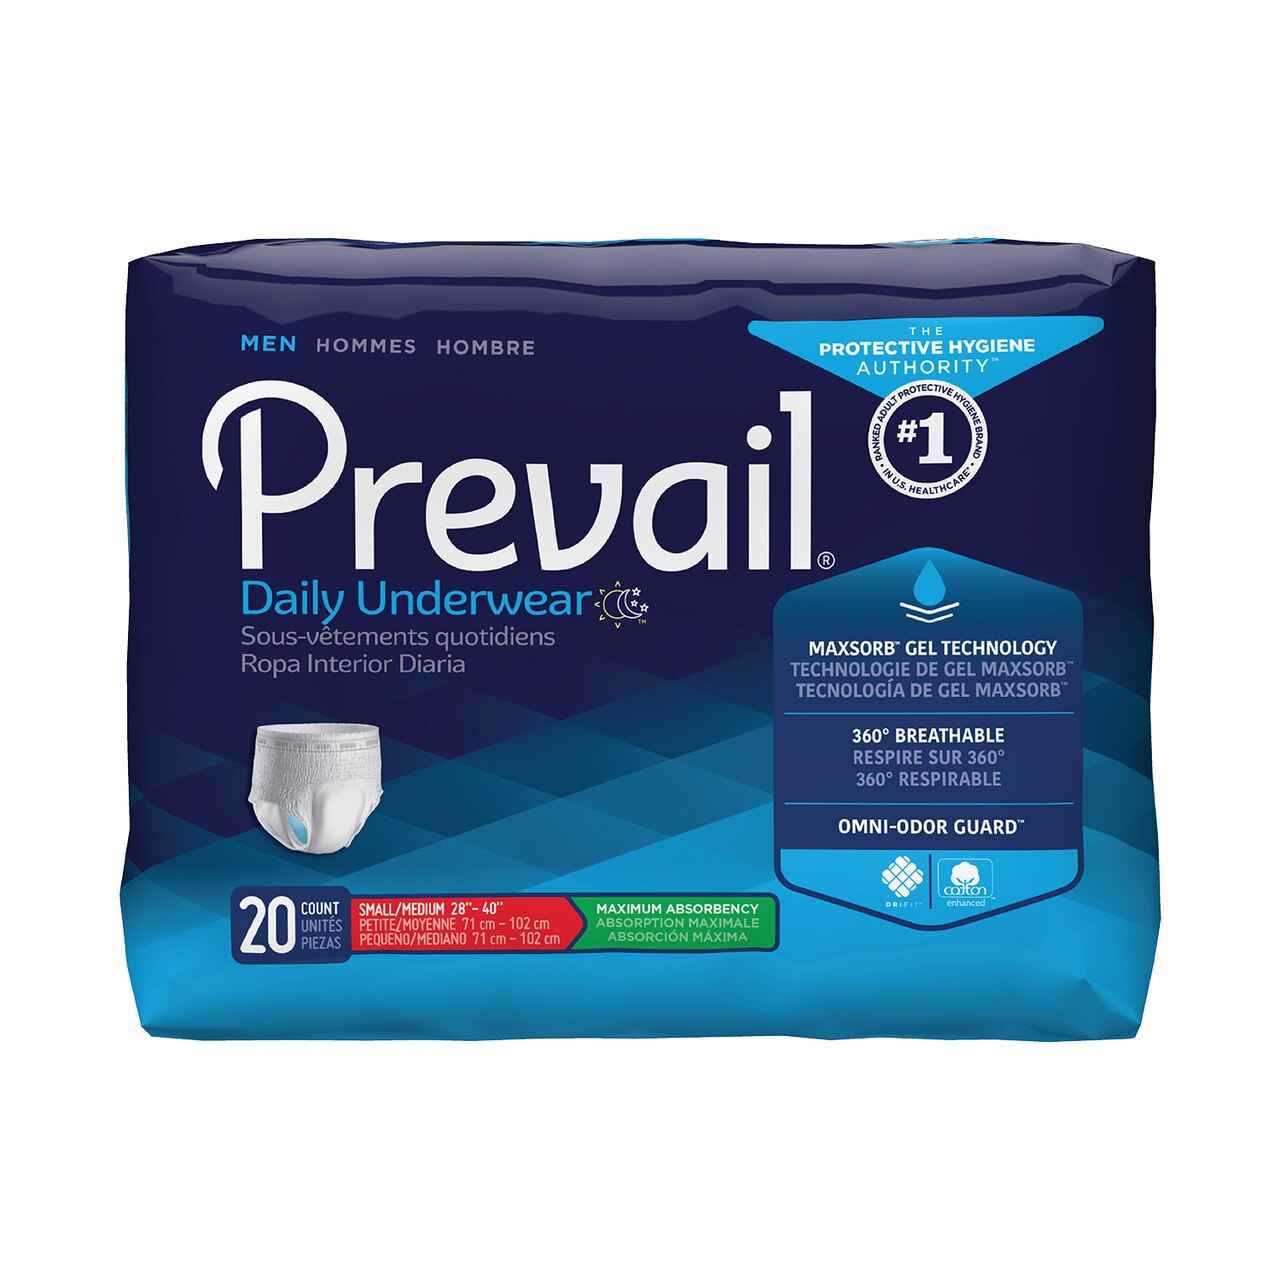 Prevail® Per-Fit® Disposable Moderate Absorbency Pull Up – STUFFS FOR  SENIORS